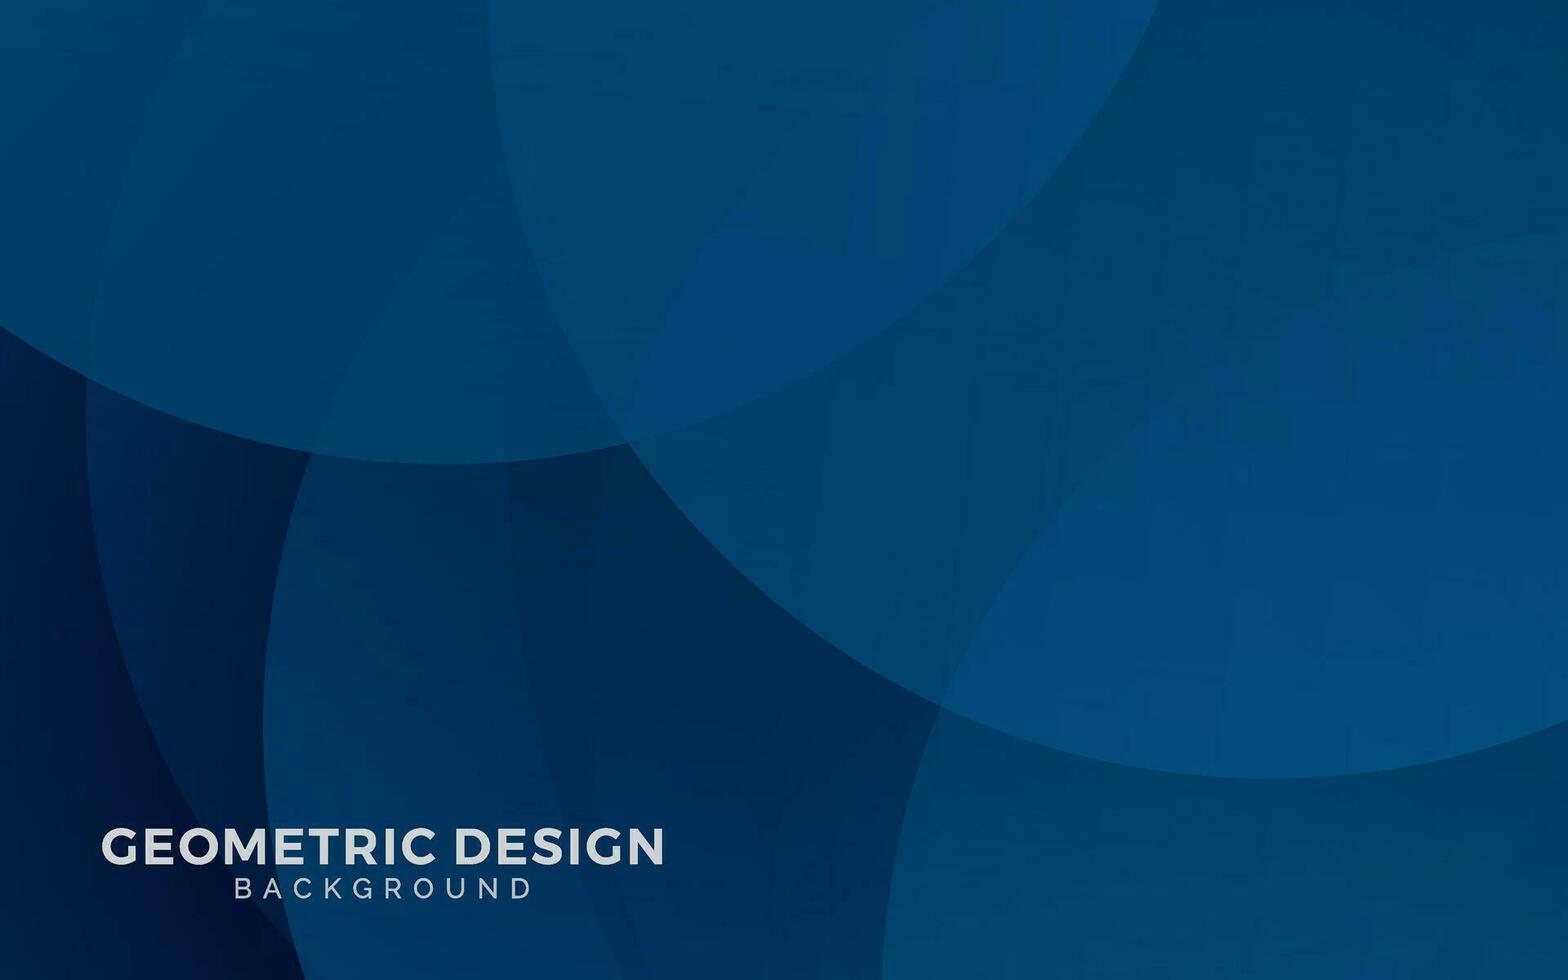 Abstract circle blue gradient geometric shape background vector